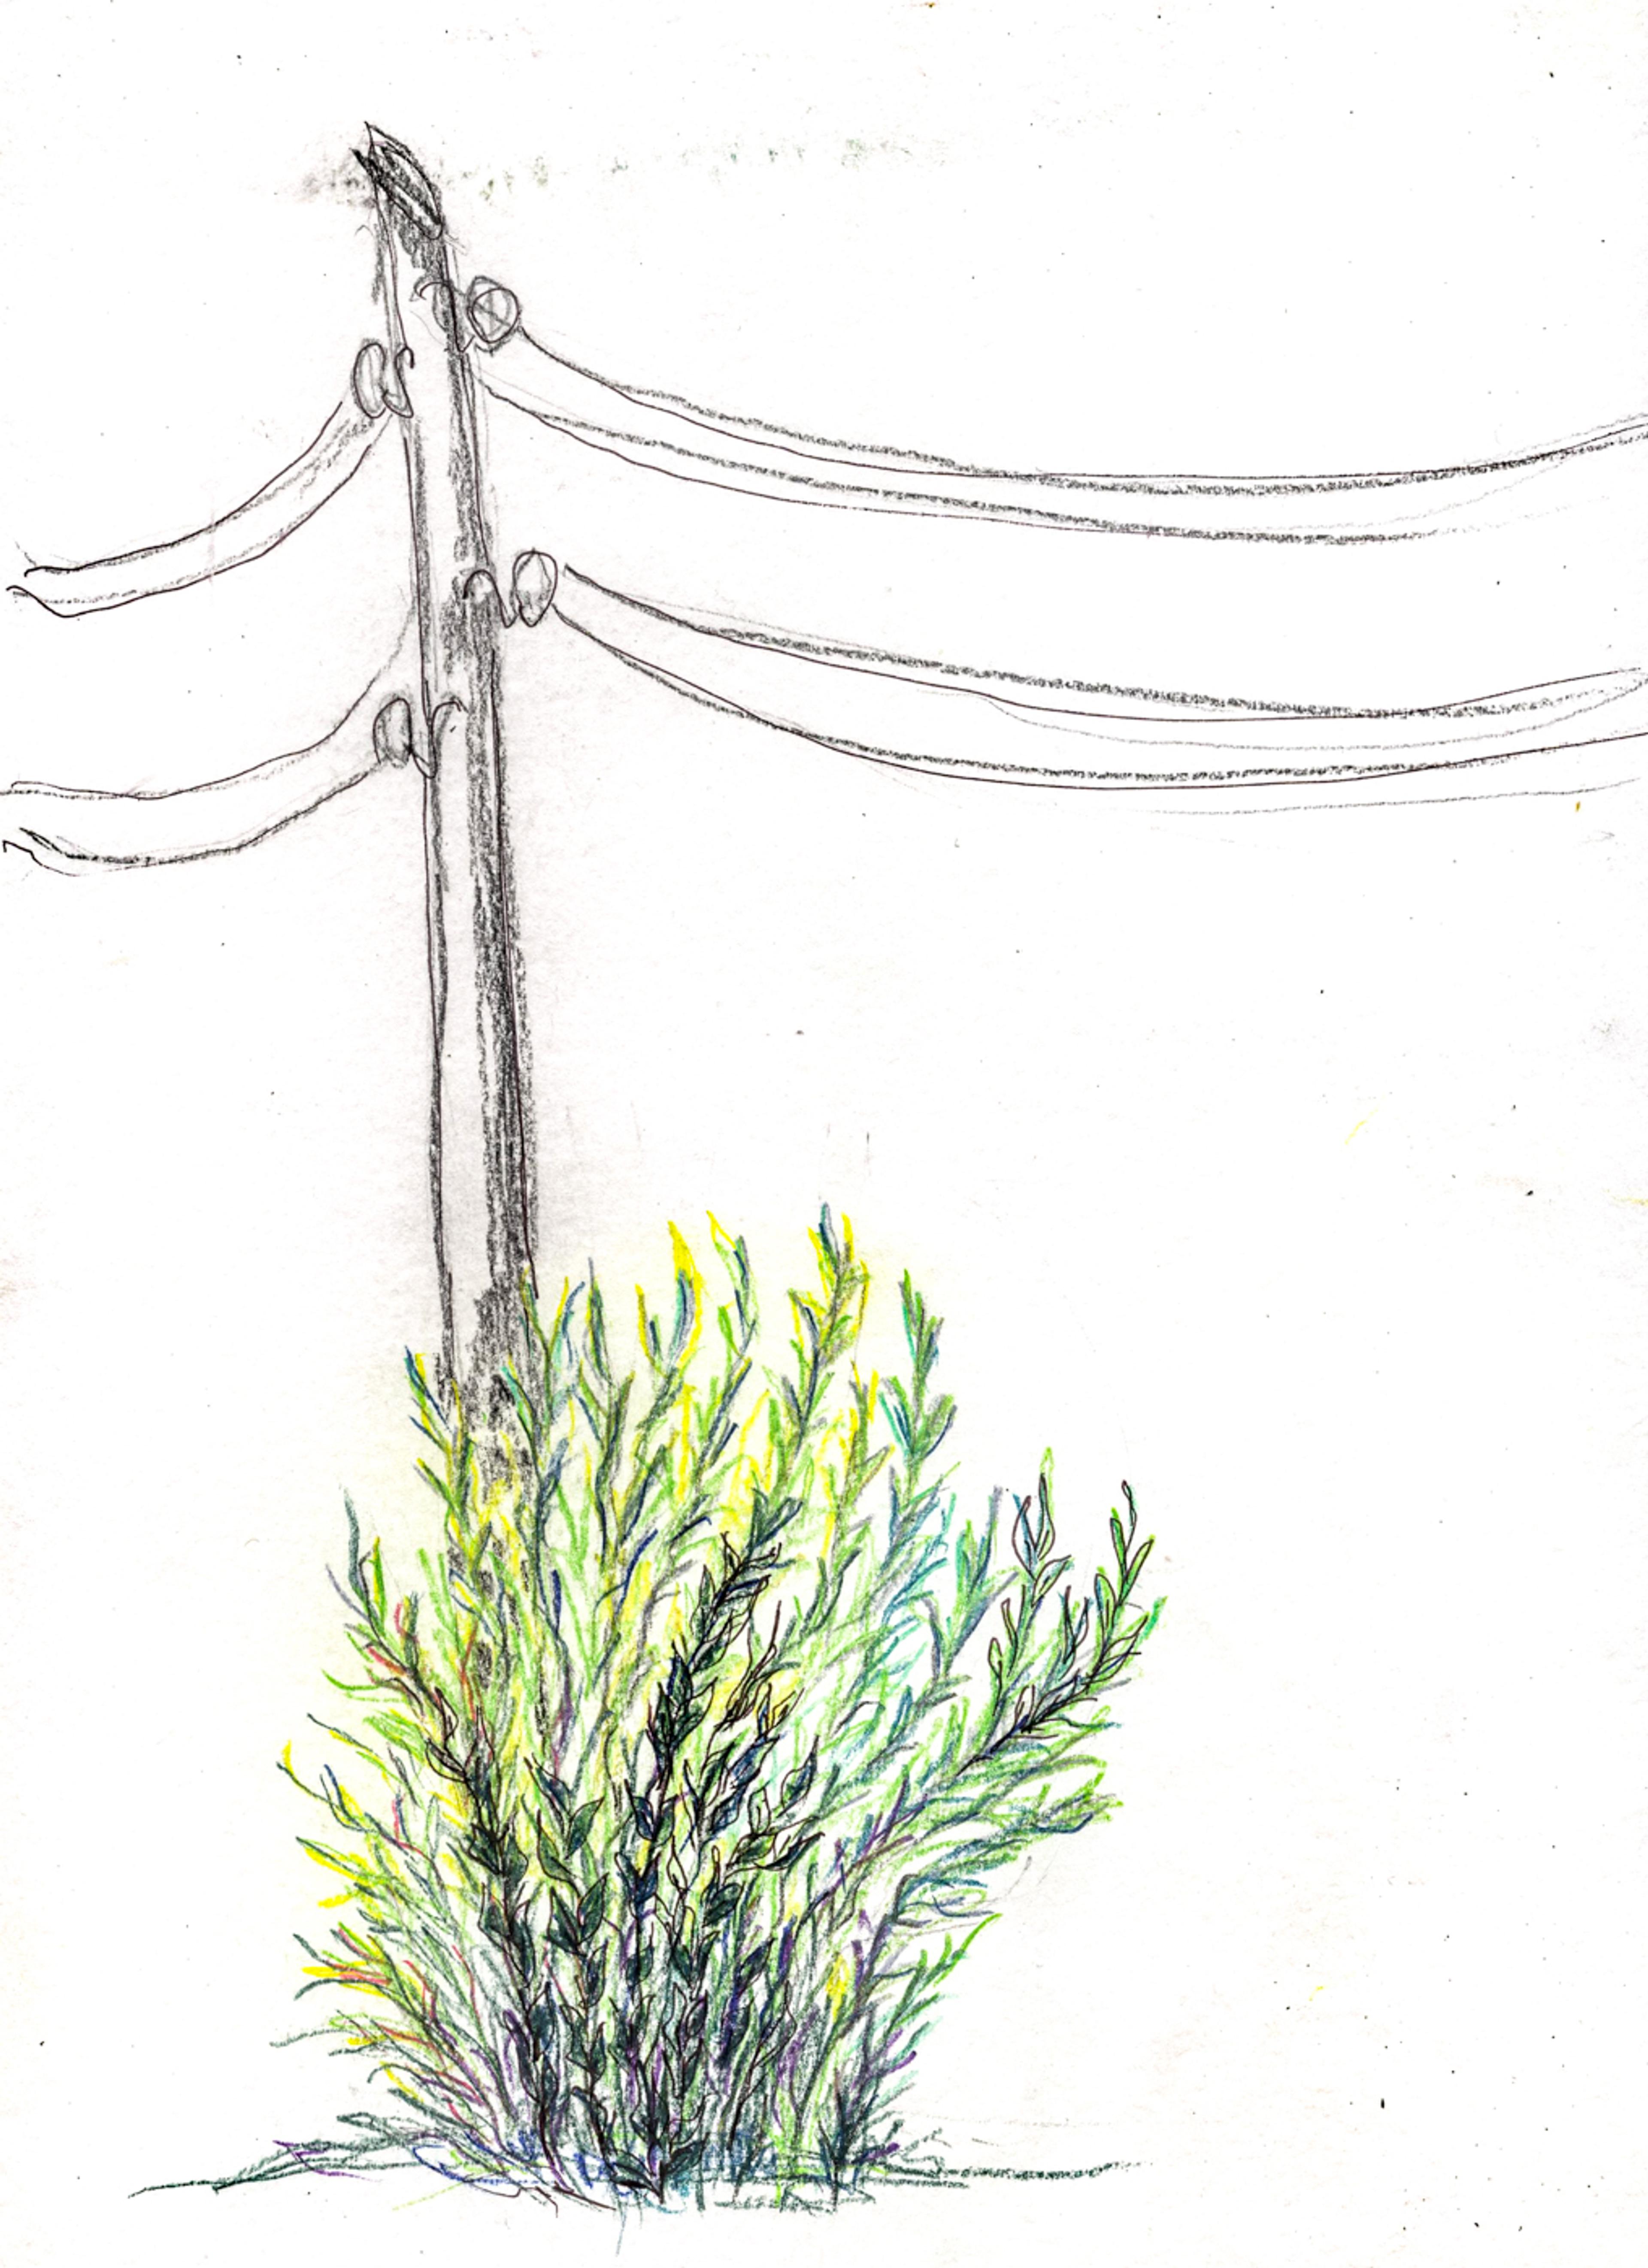 pencil drawing of an electricity pole 